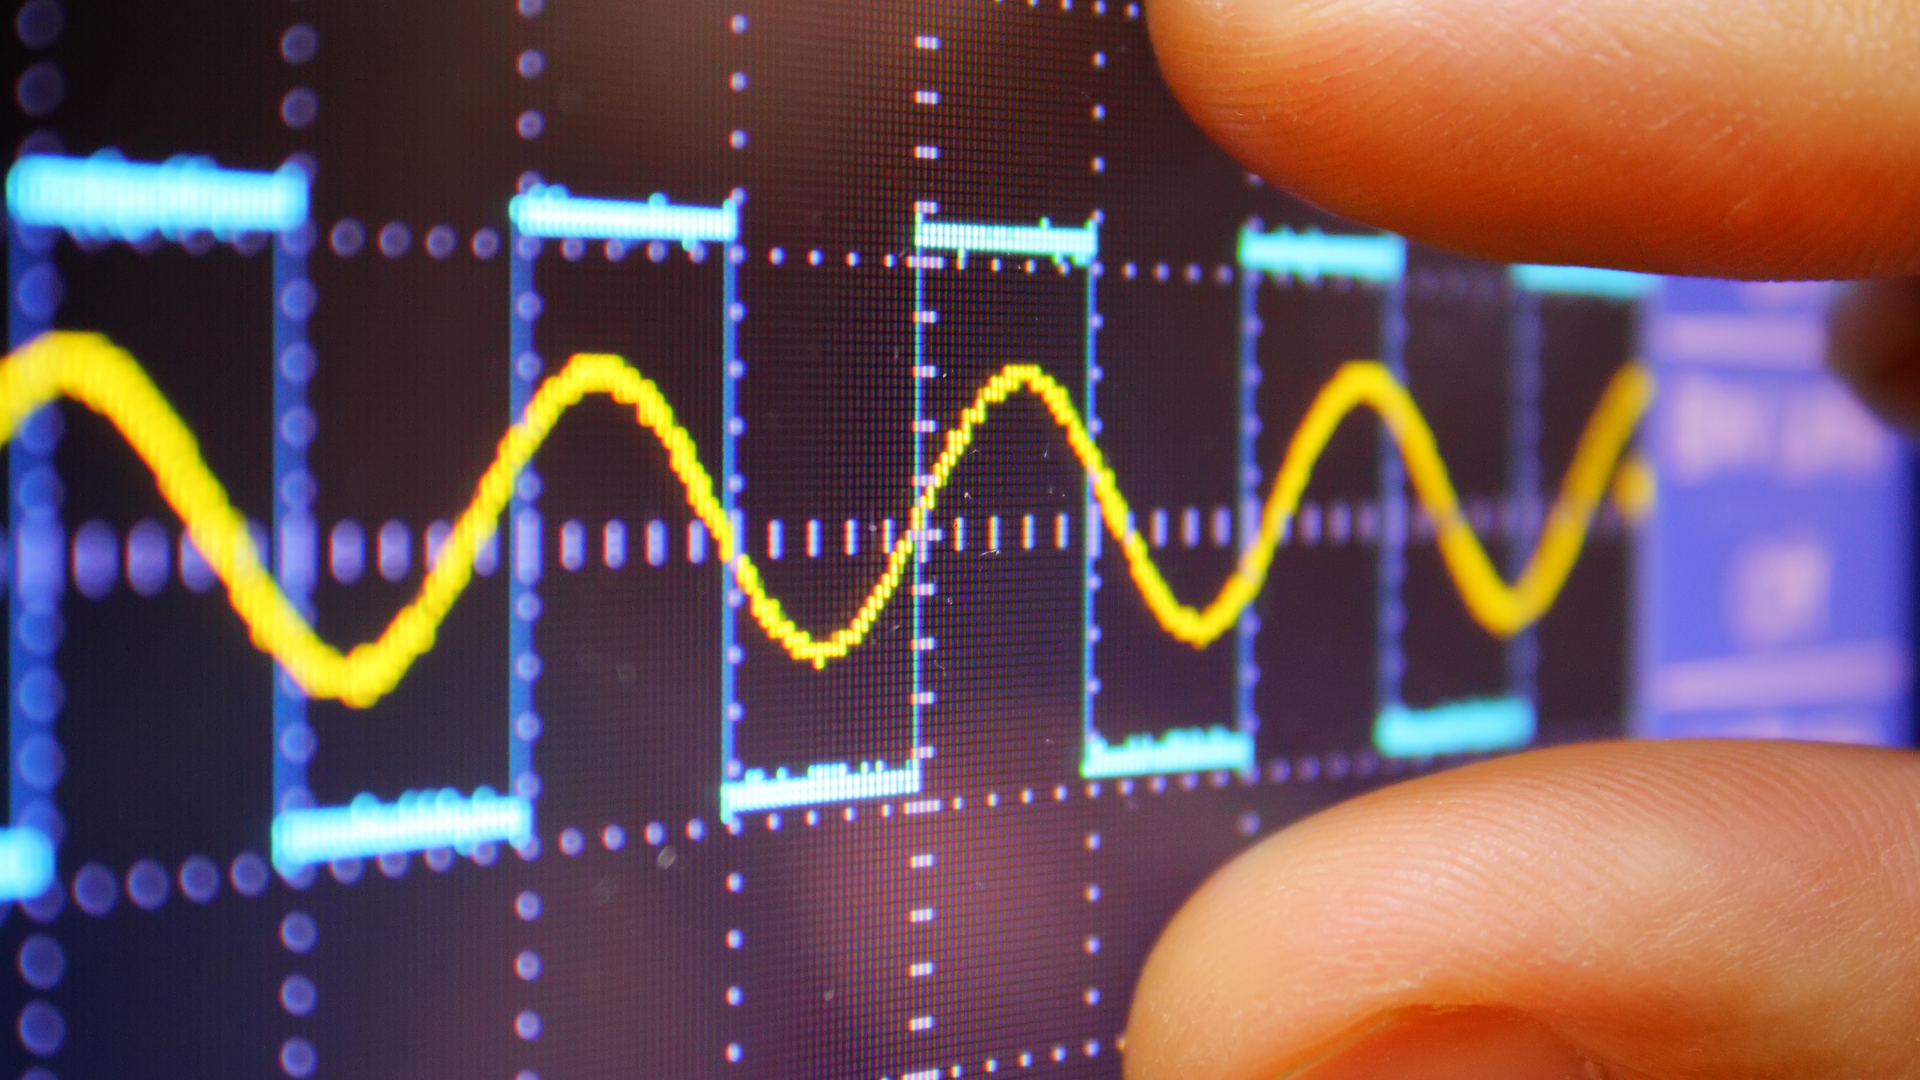 Closeup of two fingers measuring a yellow frequency line on a LCD screen